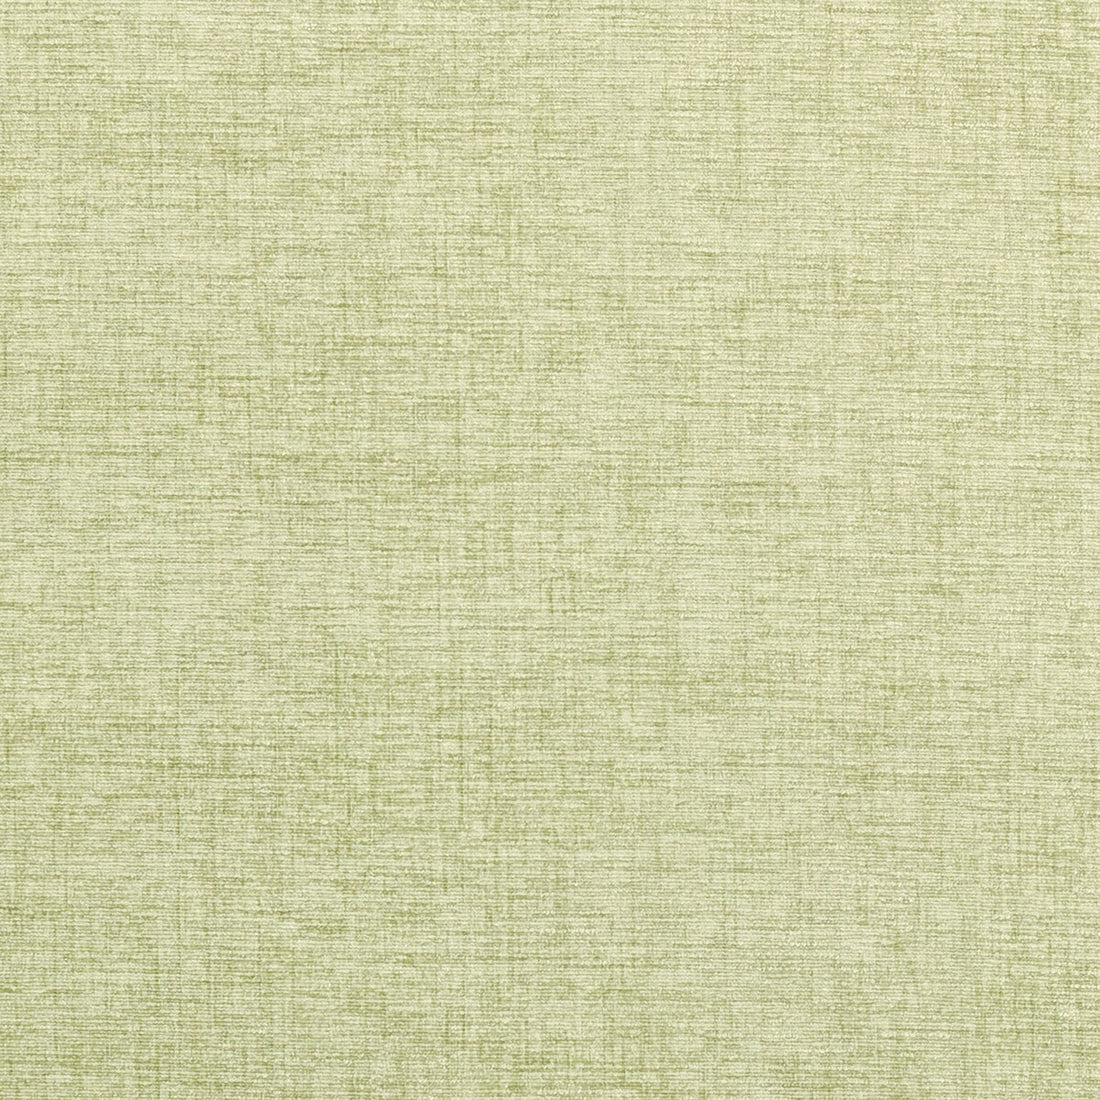 Karina fabric in celadon color - pattern F0371/08.CAC.0 - by Clarke And Clarke in the Clarke &amp; Clarke Karina collection